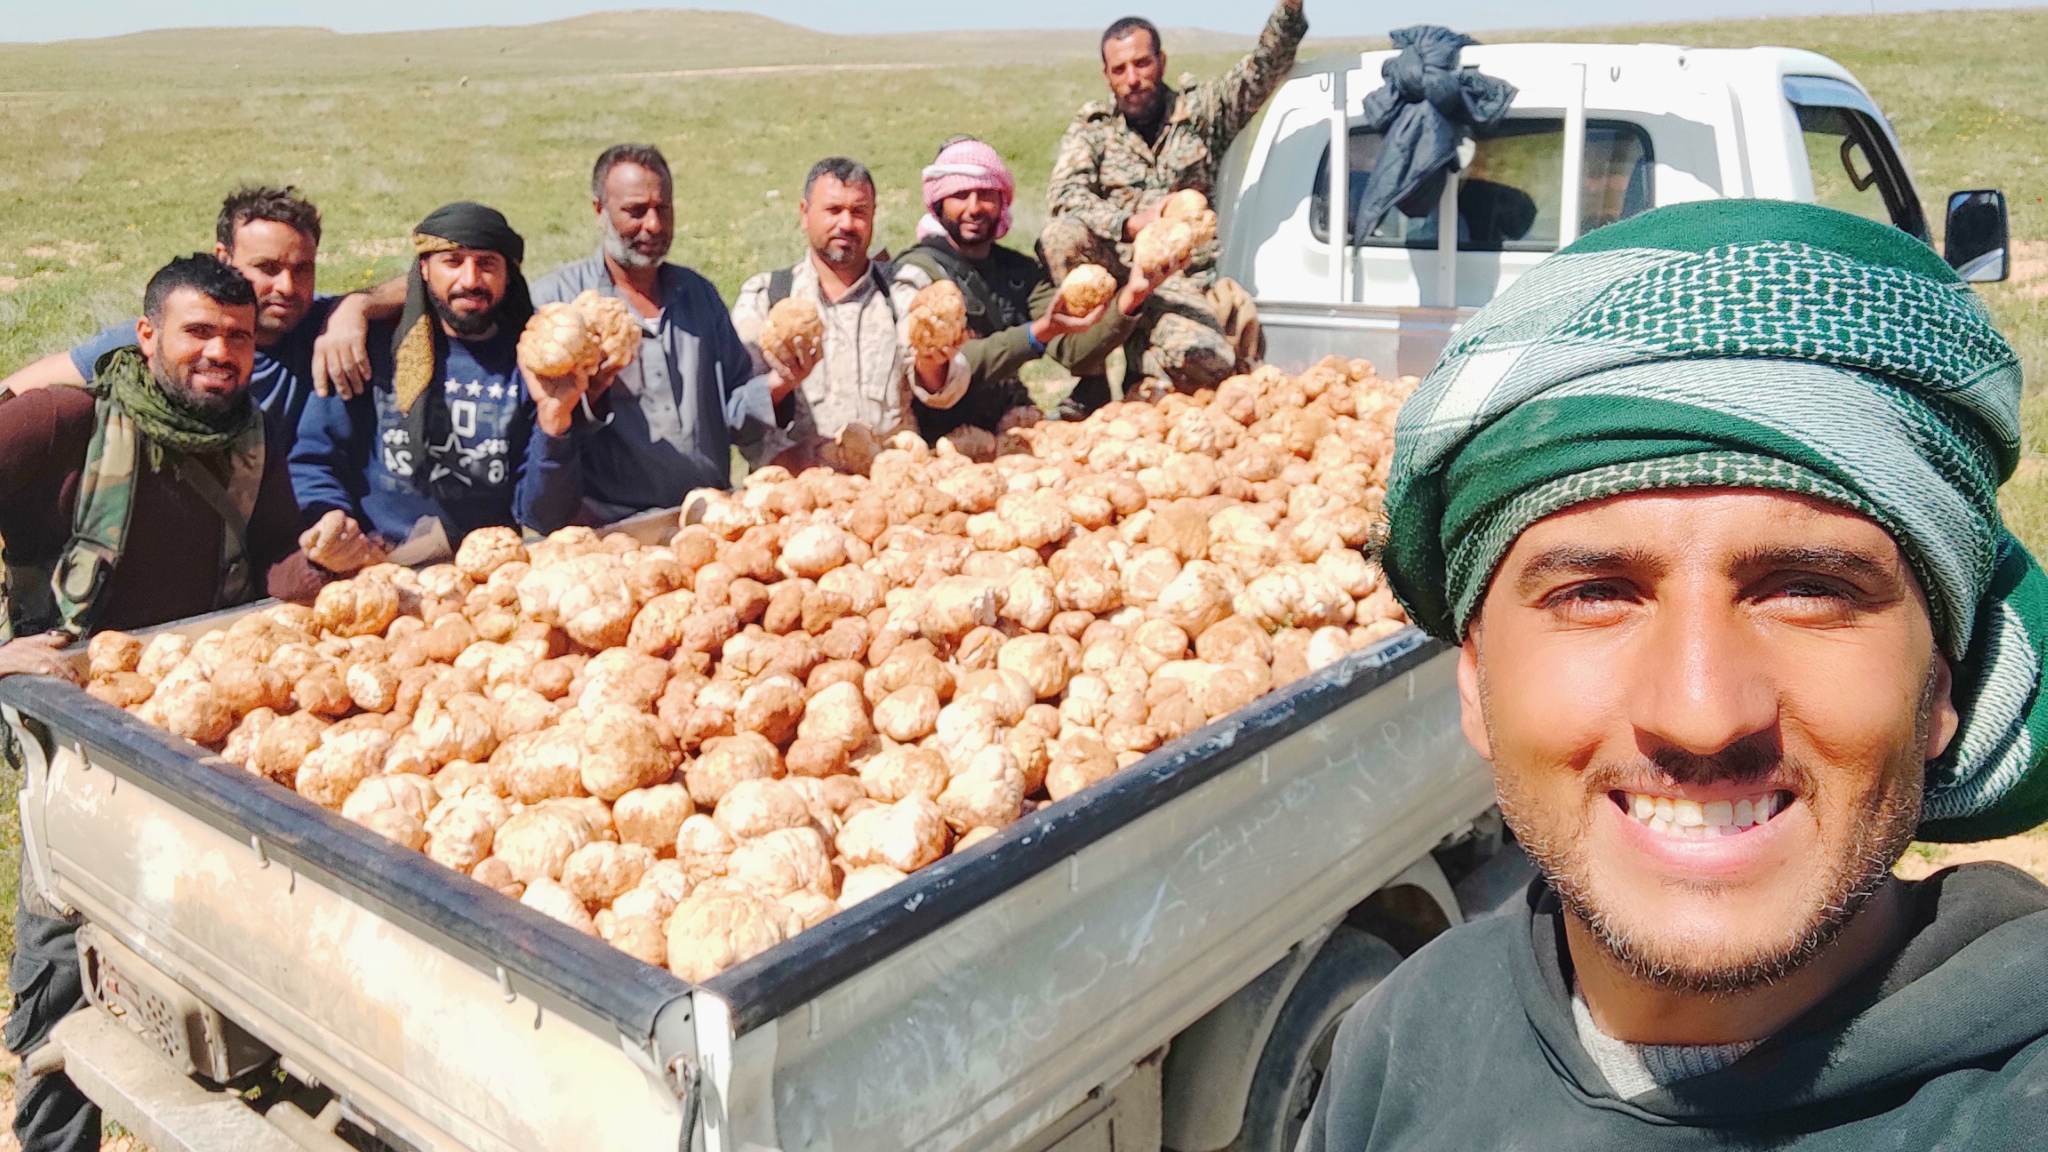 Syrian truffle hunters pose with their harvest (social media)